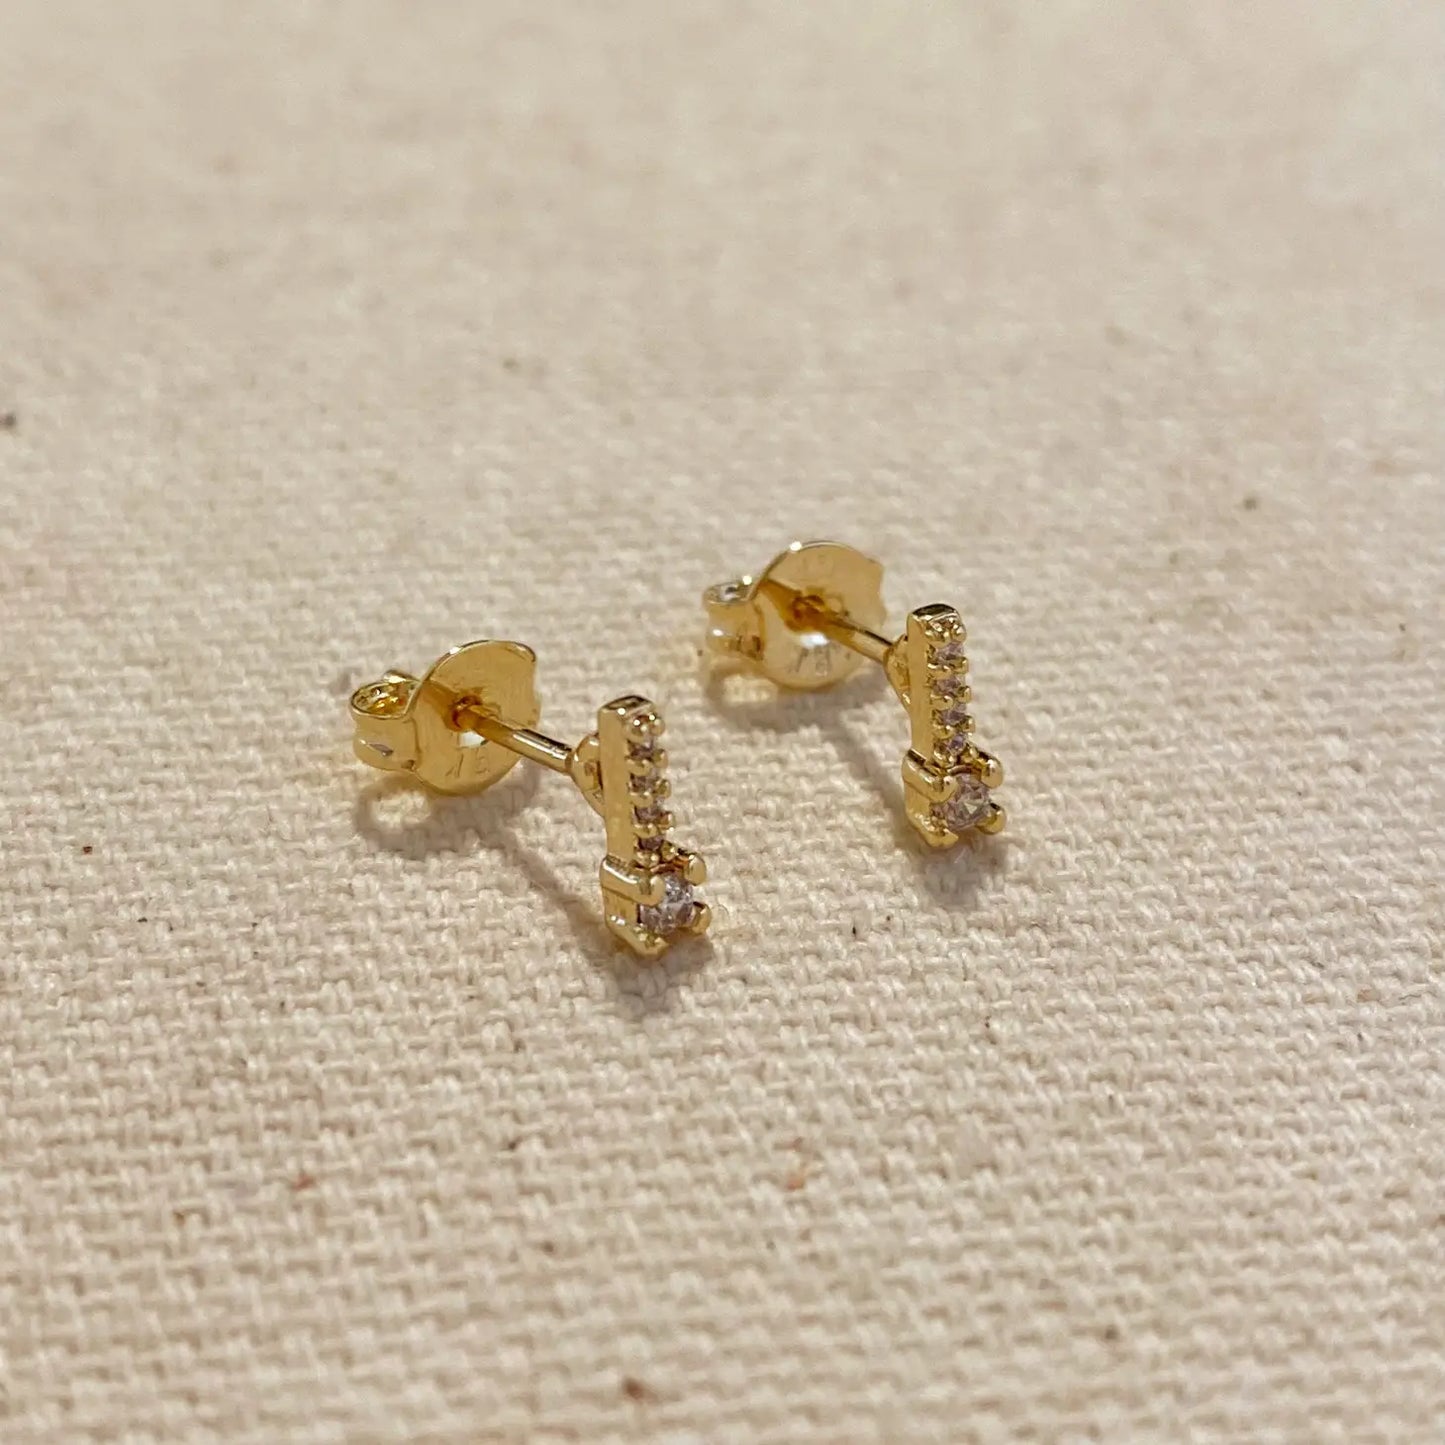 Goldfi| 18k Gold Filled Bar Stud Earrings with Micro Cubic Zirconia Stones